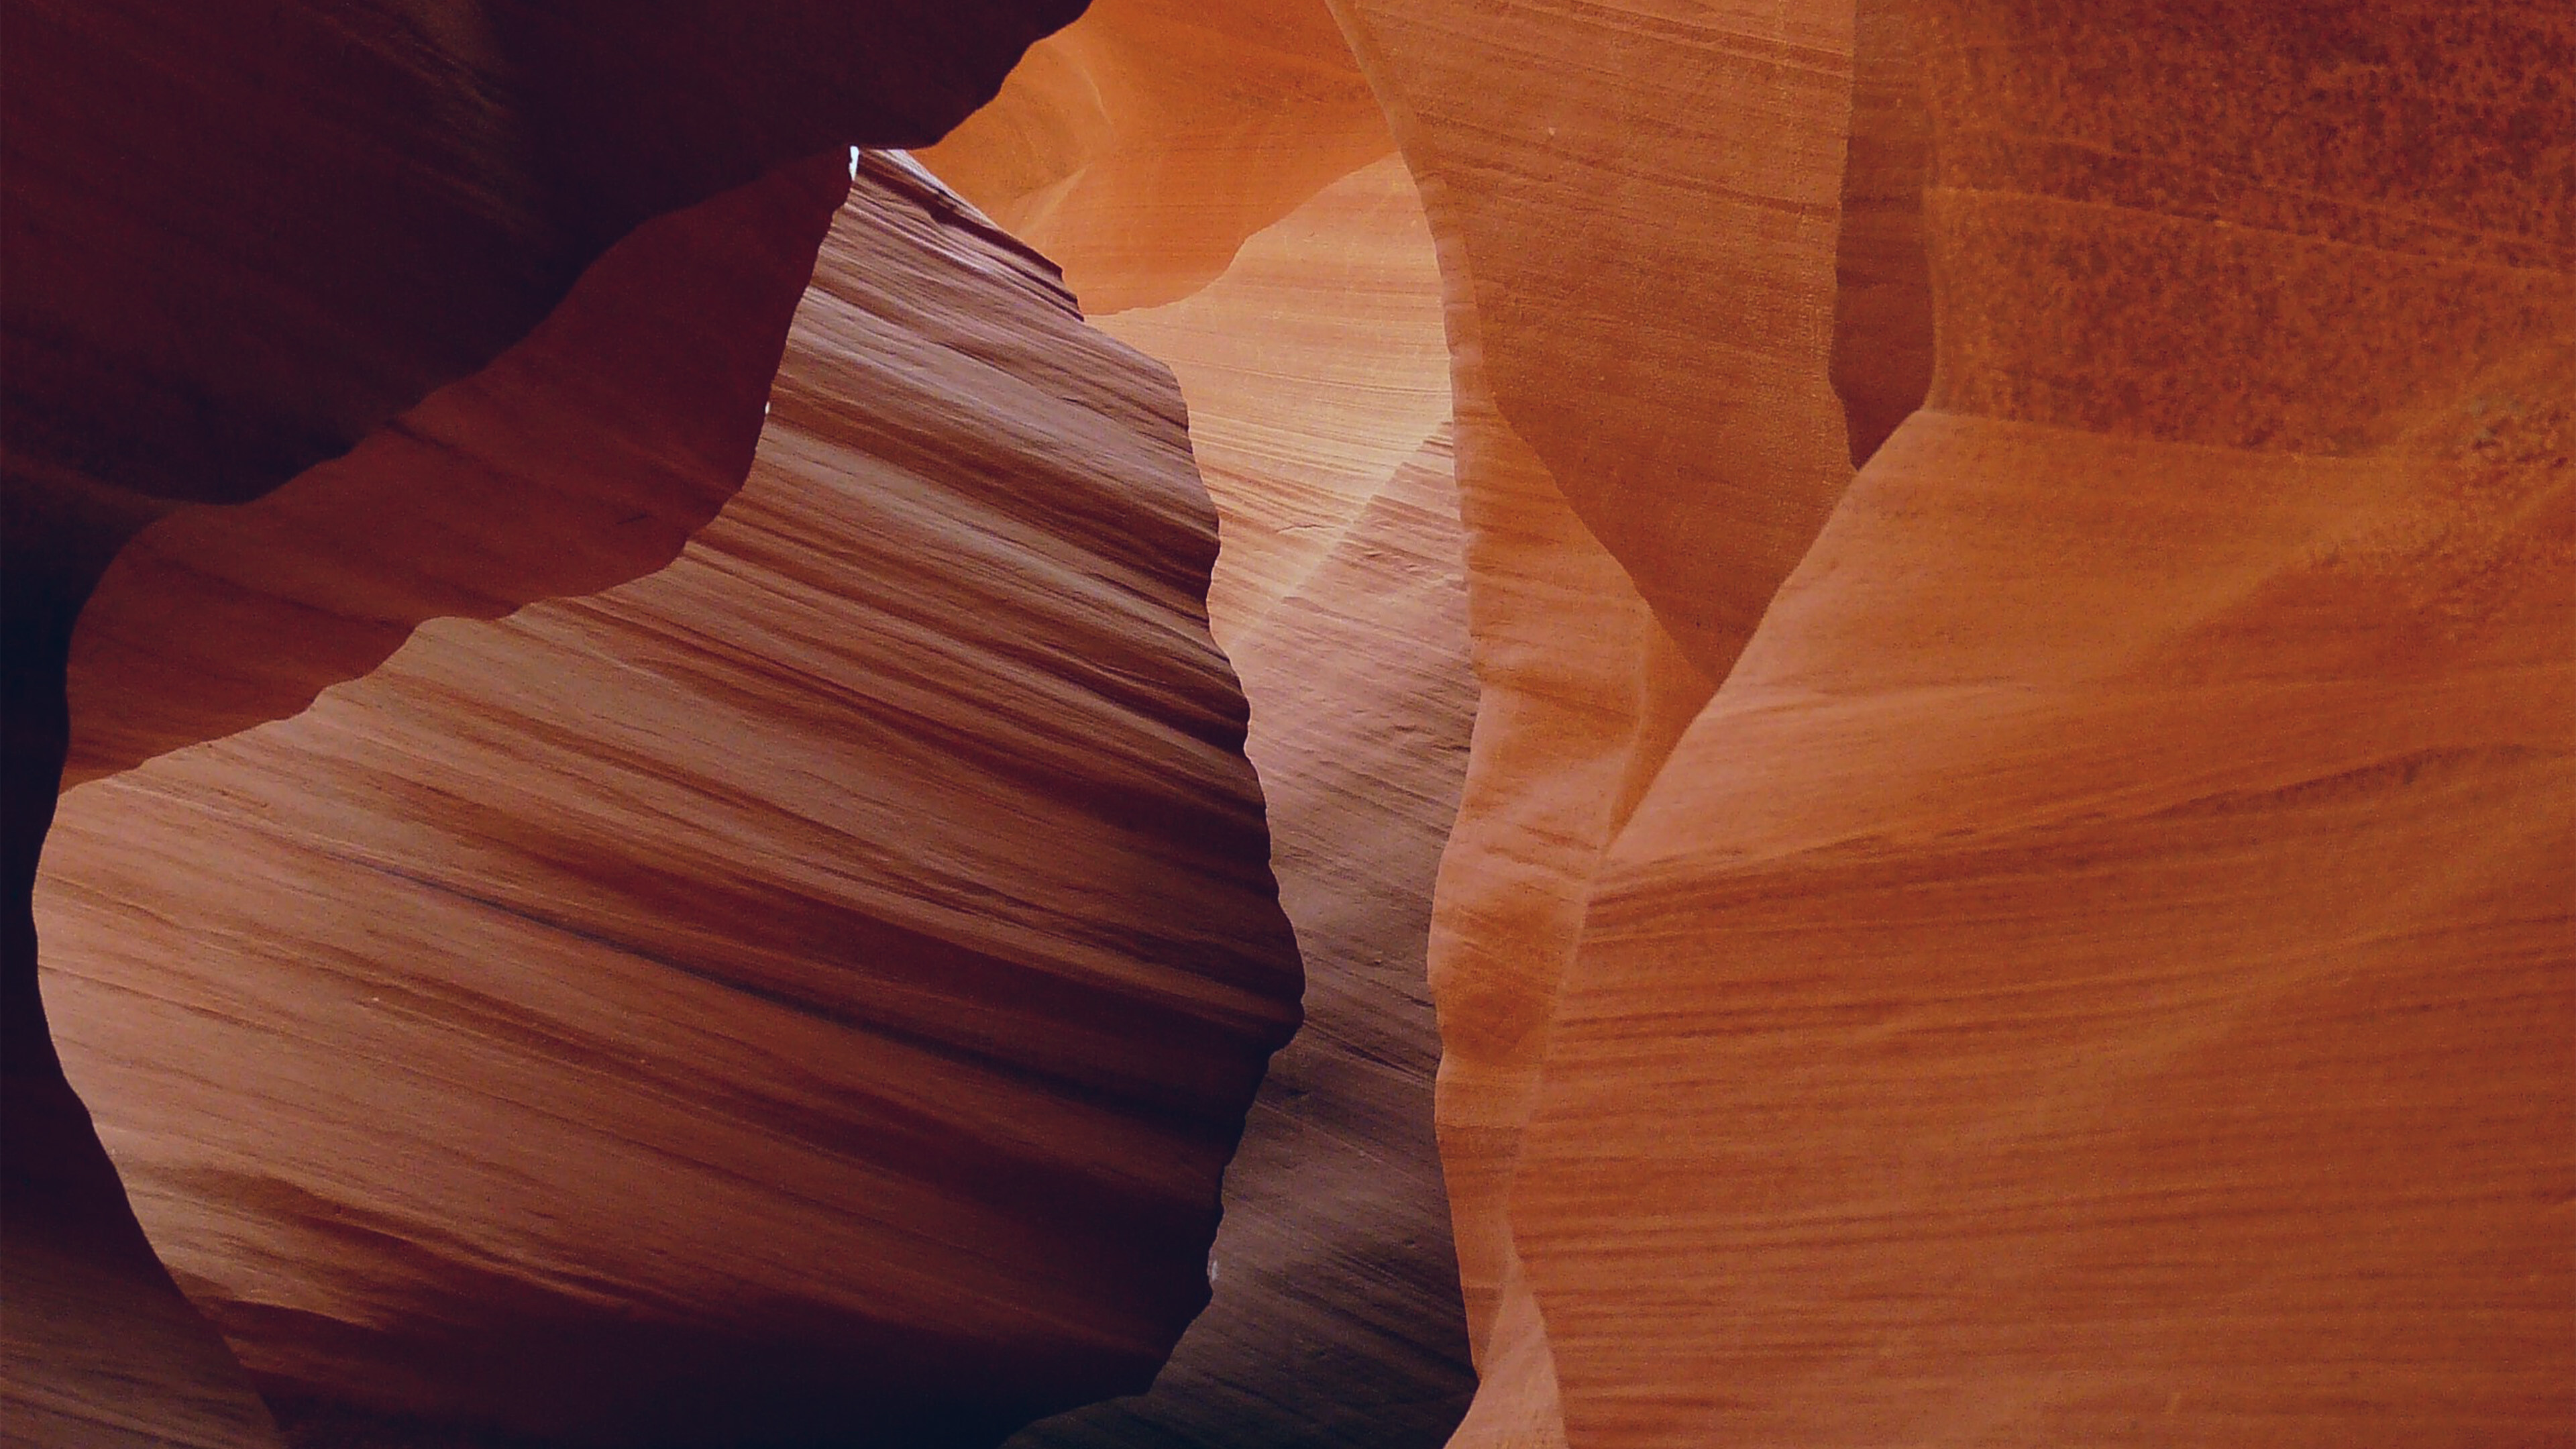 Geology: Rock, Nature, Orange mountains, Canyon, A deep cleft between escarpments or cliff. 3840x2160 4K Background.